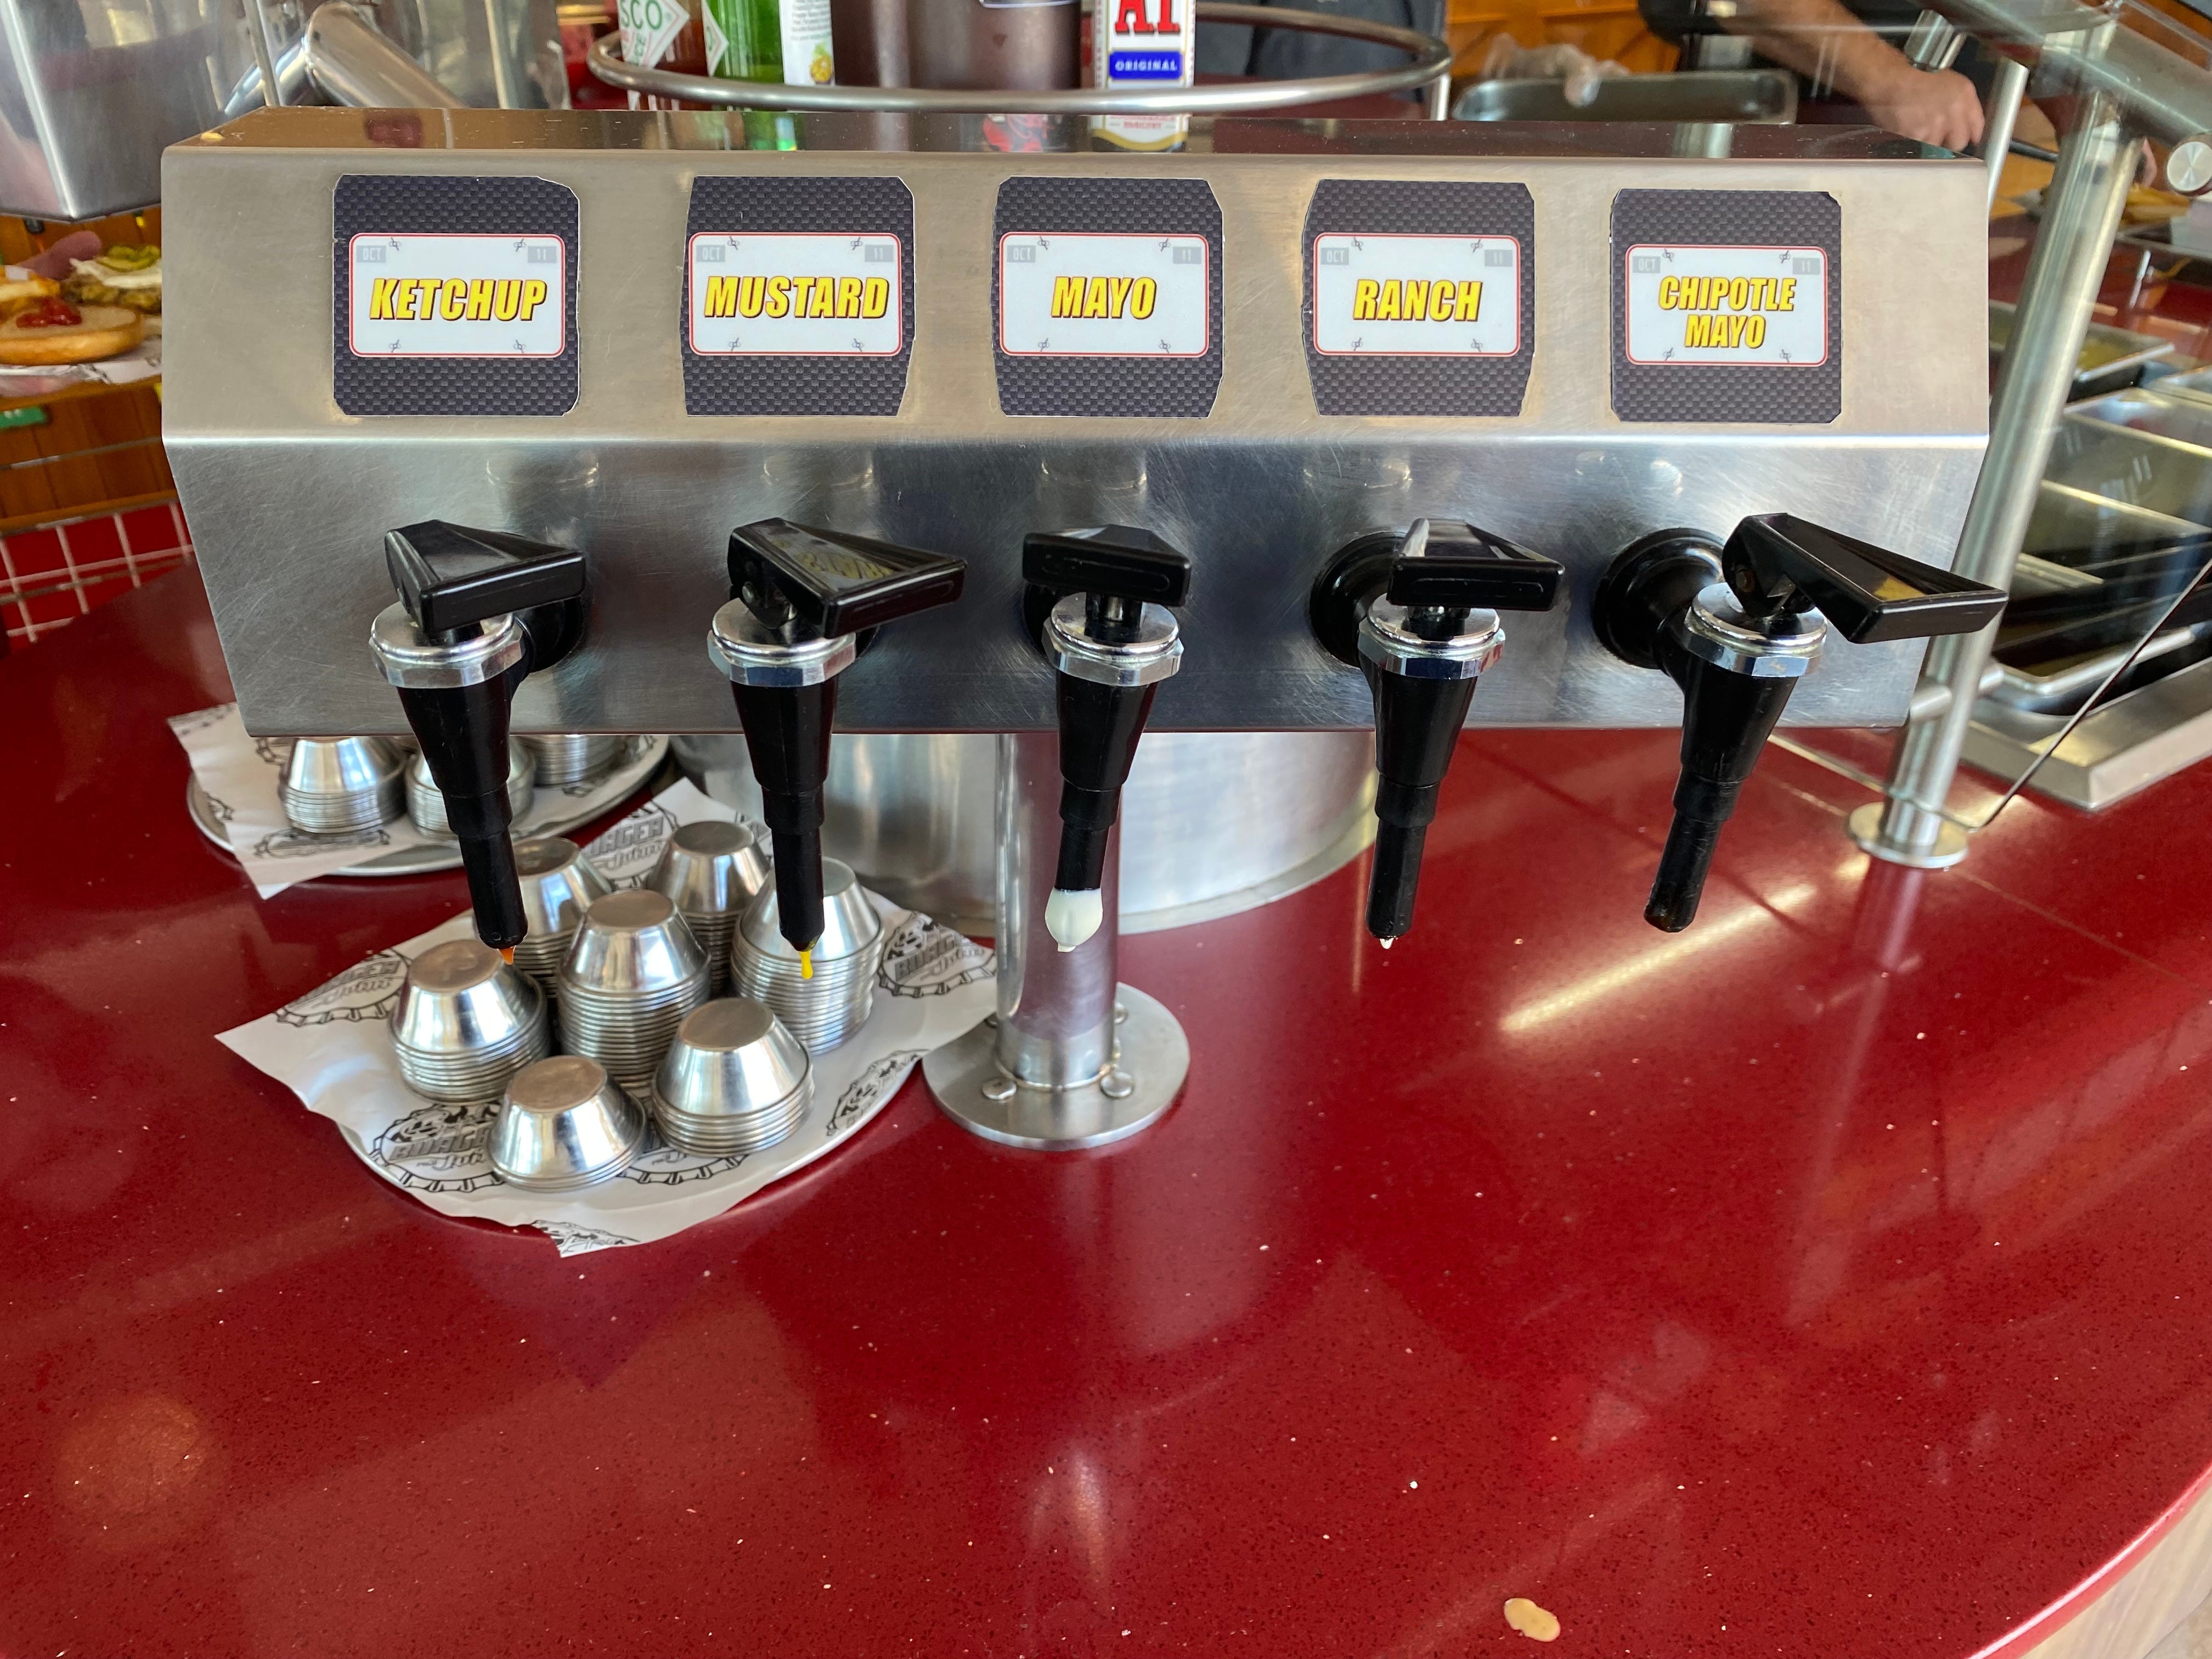 Guy's Burger Joint Condiment Station